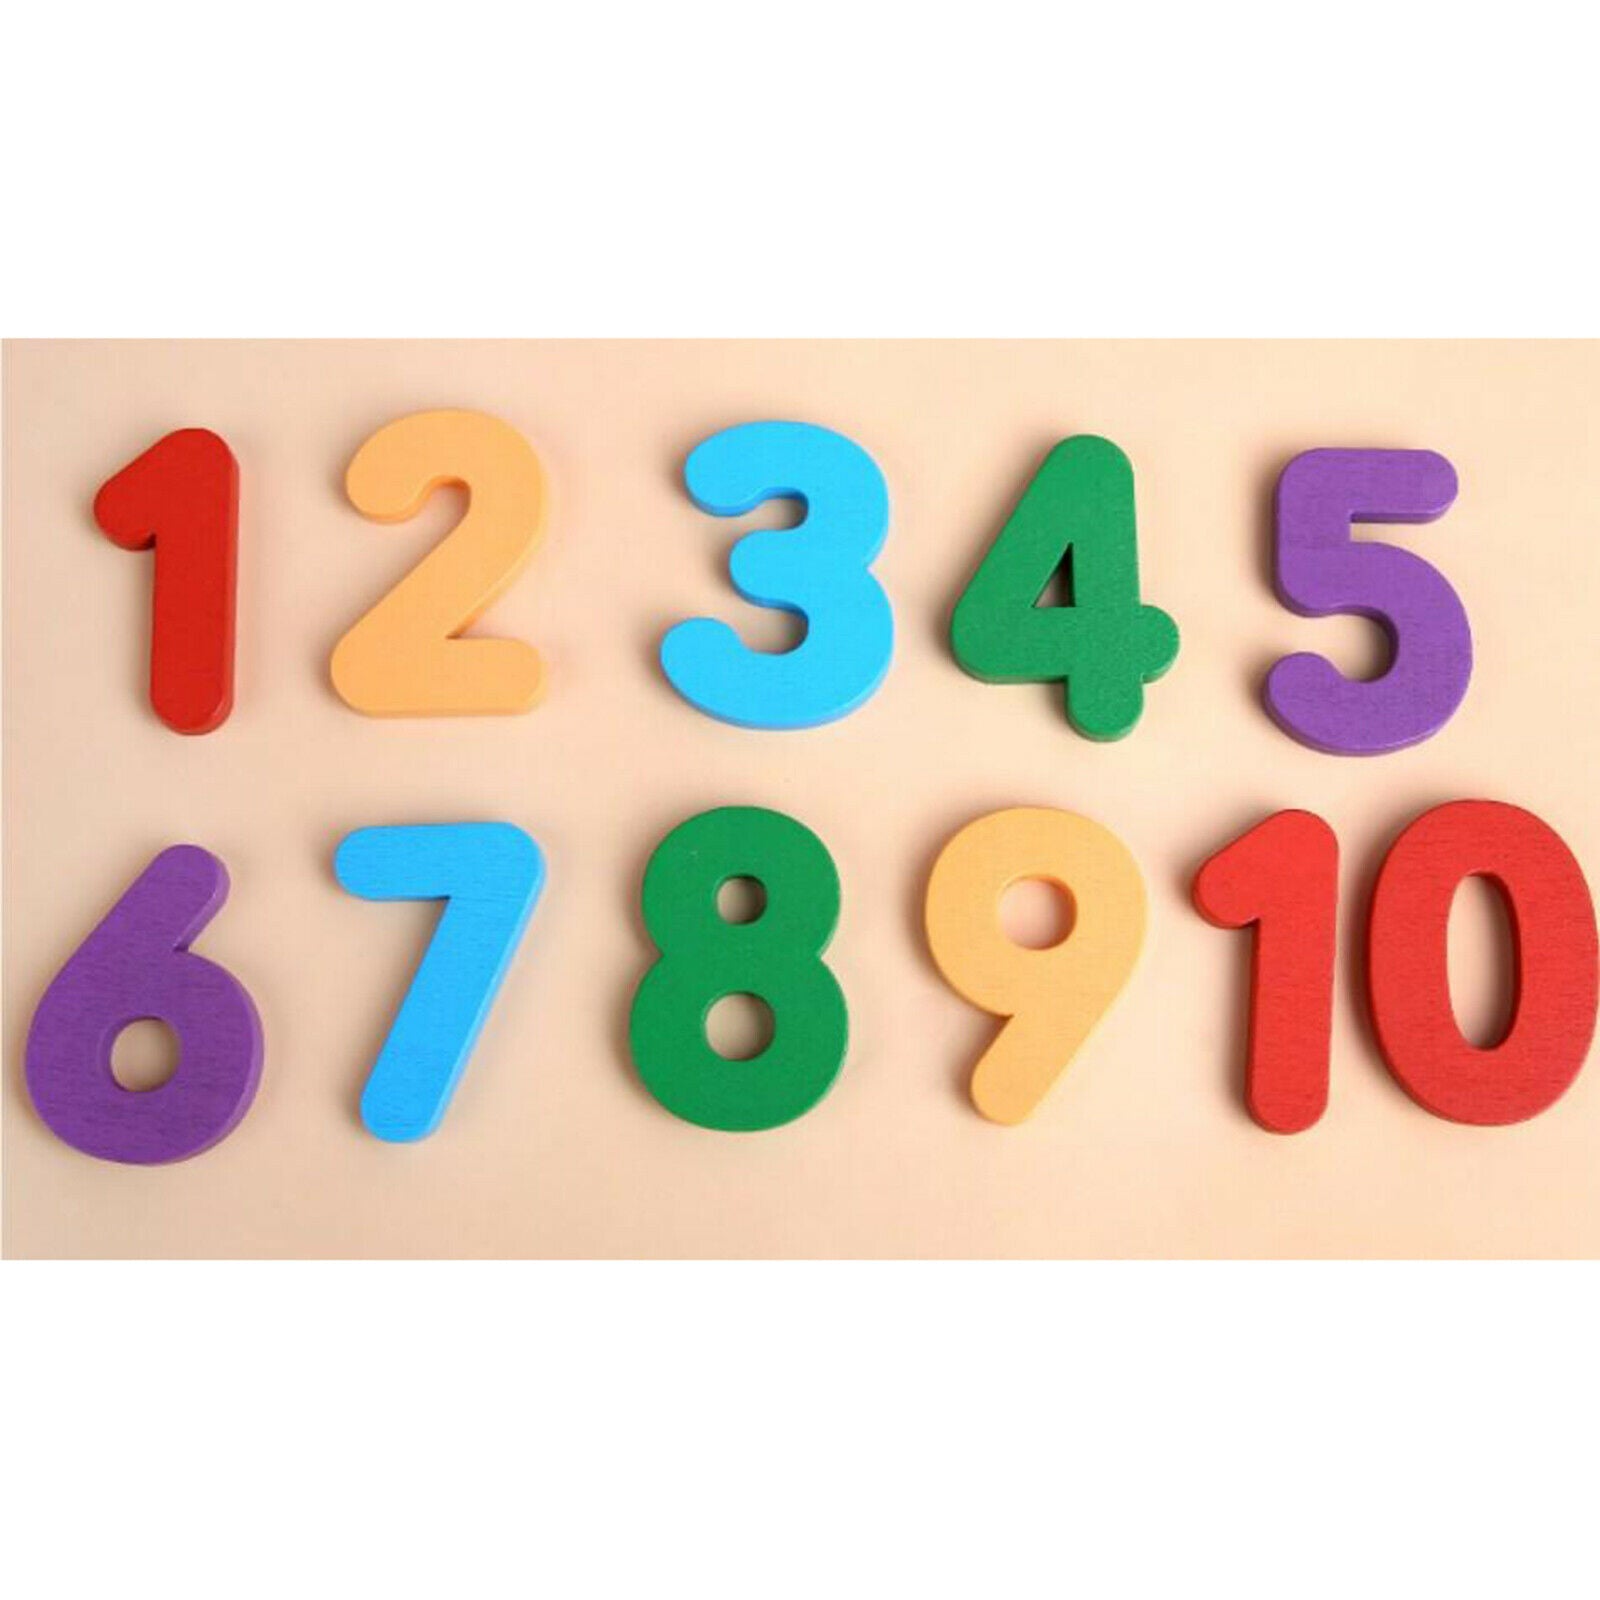 Preschool Kids Math Educational Toys Counting Wooden Sticks Number Cards